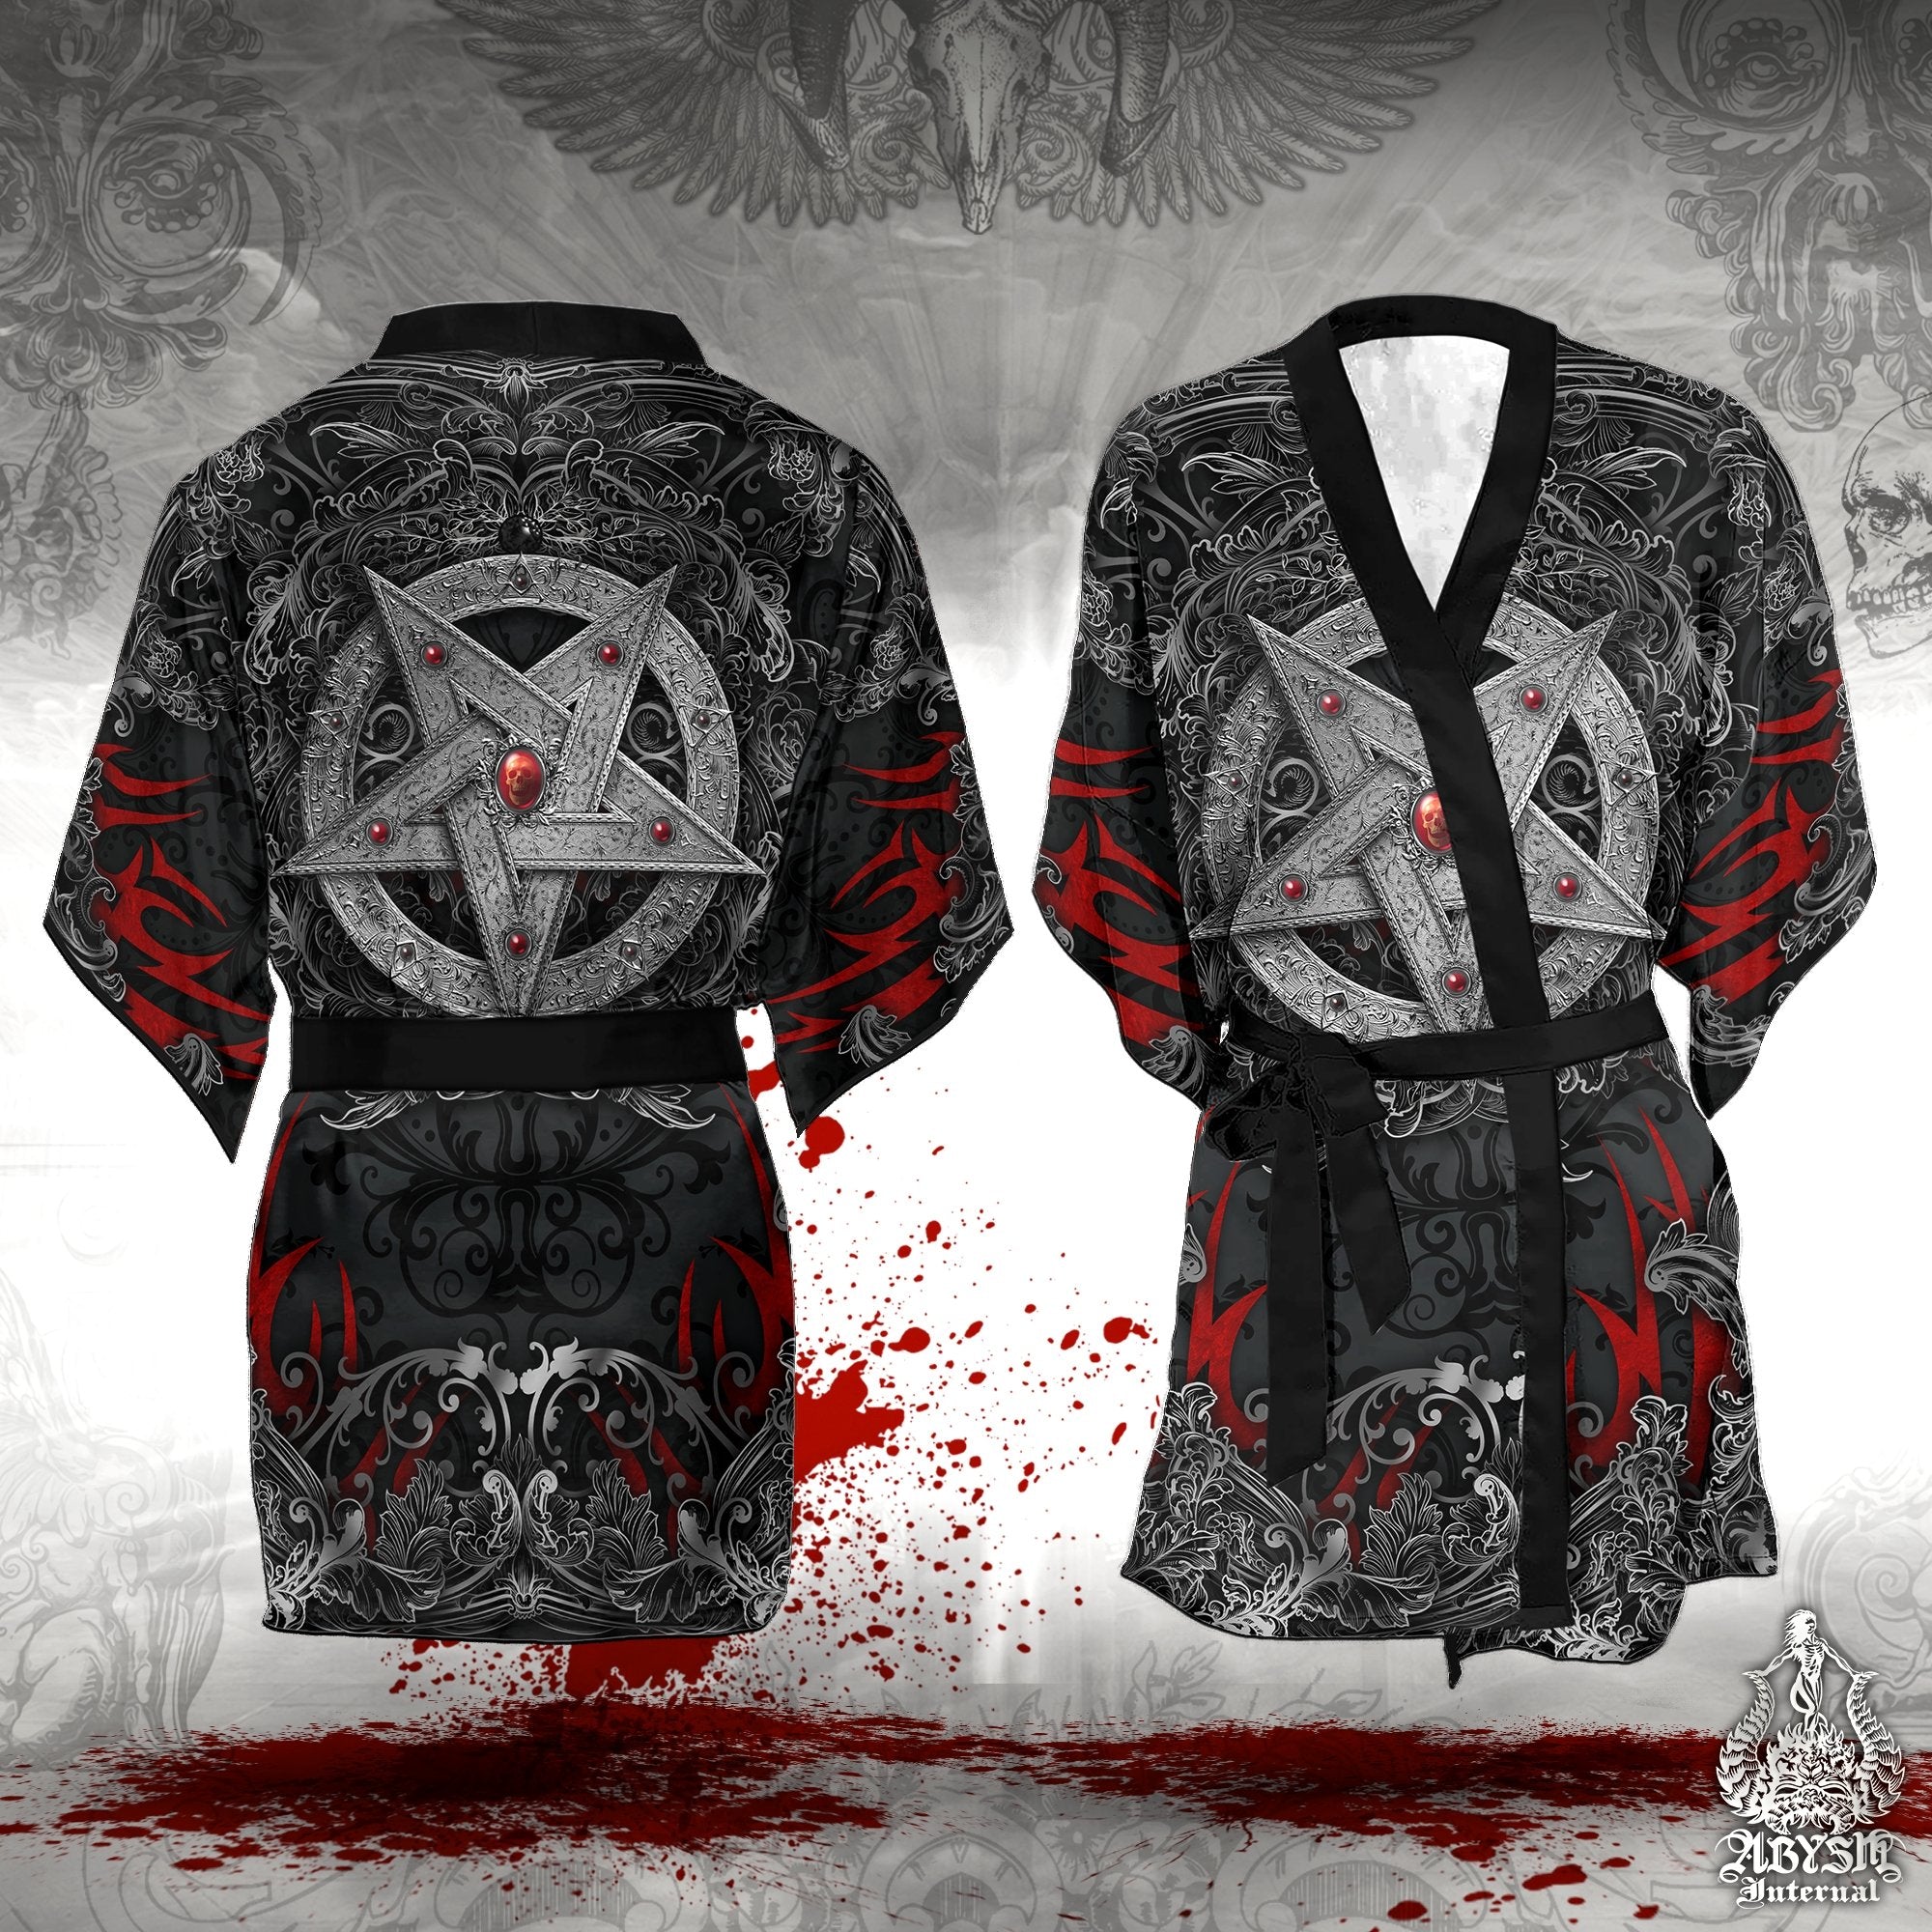 Pentagram Cover Up, Beach Outfit, Party Kimono, Metal Summer Festival Robe, Satanic Gothic Indie and Alternative Clothing, Unisex - Silver Black - Abysm Internal